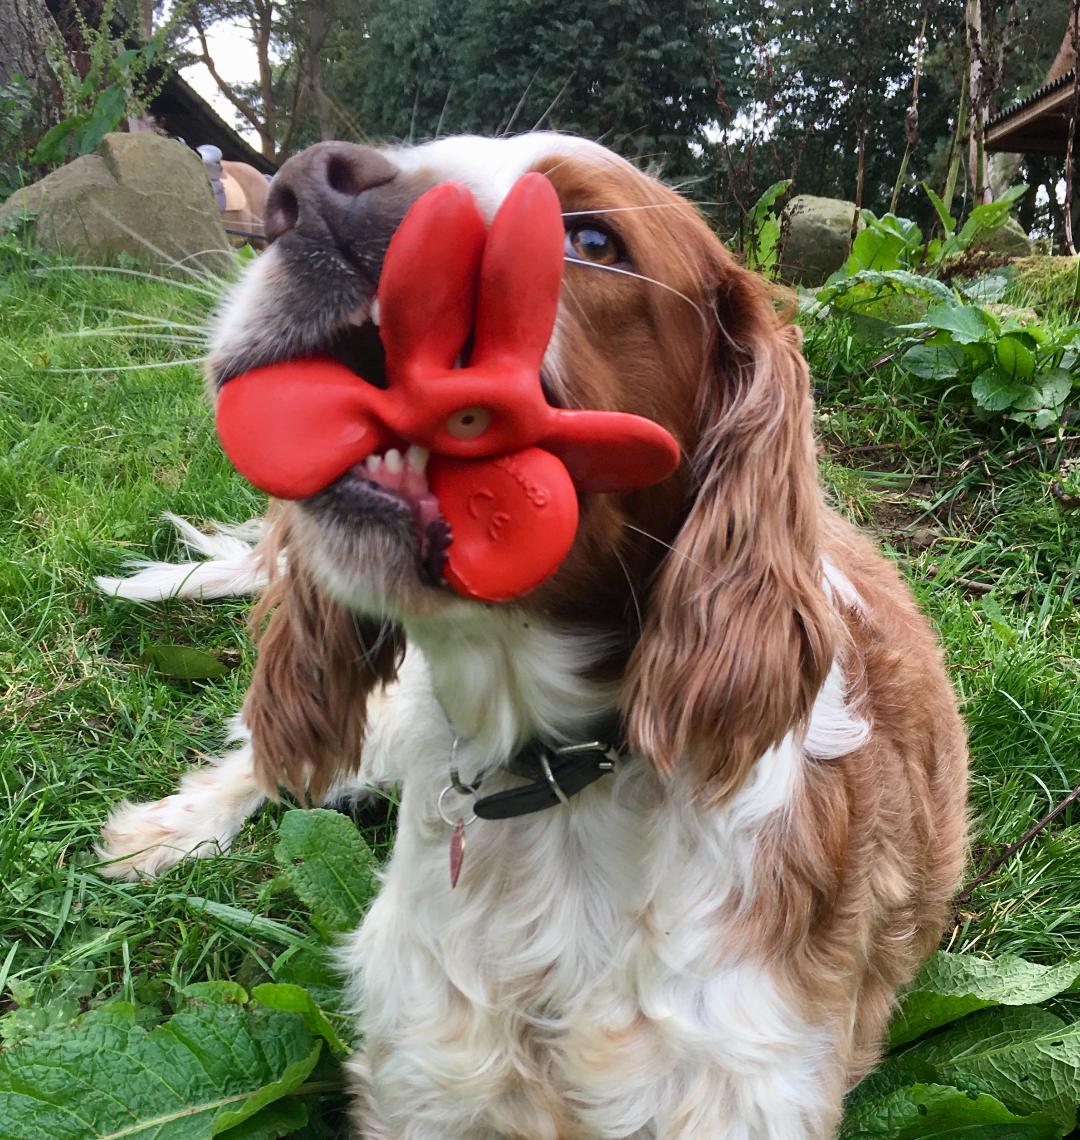 Propeller Red Pet toy - Natural Rubber Toys